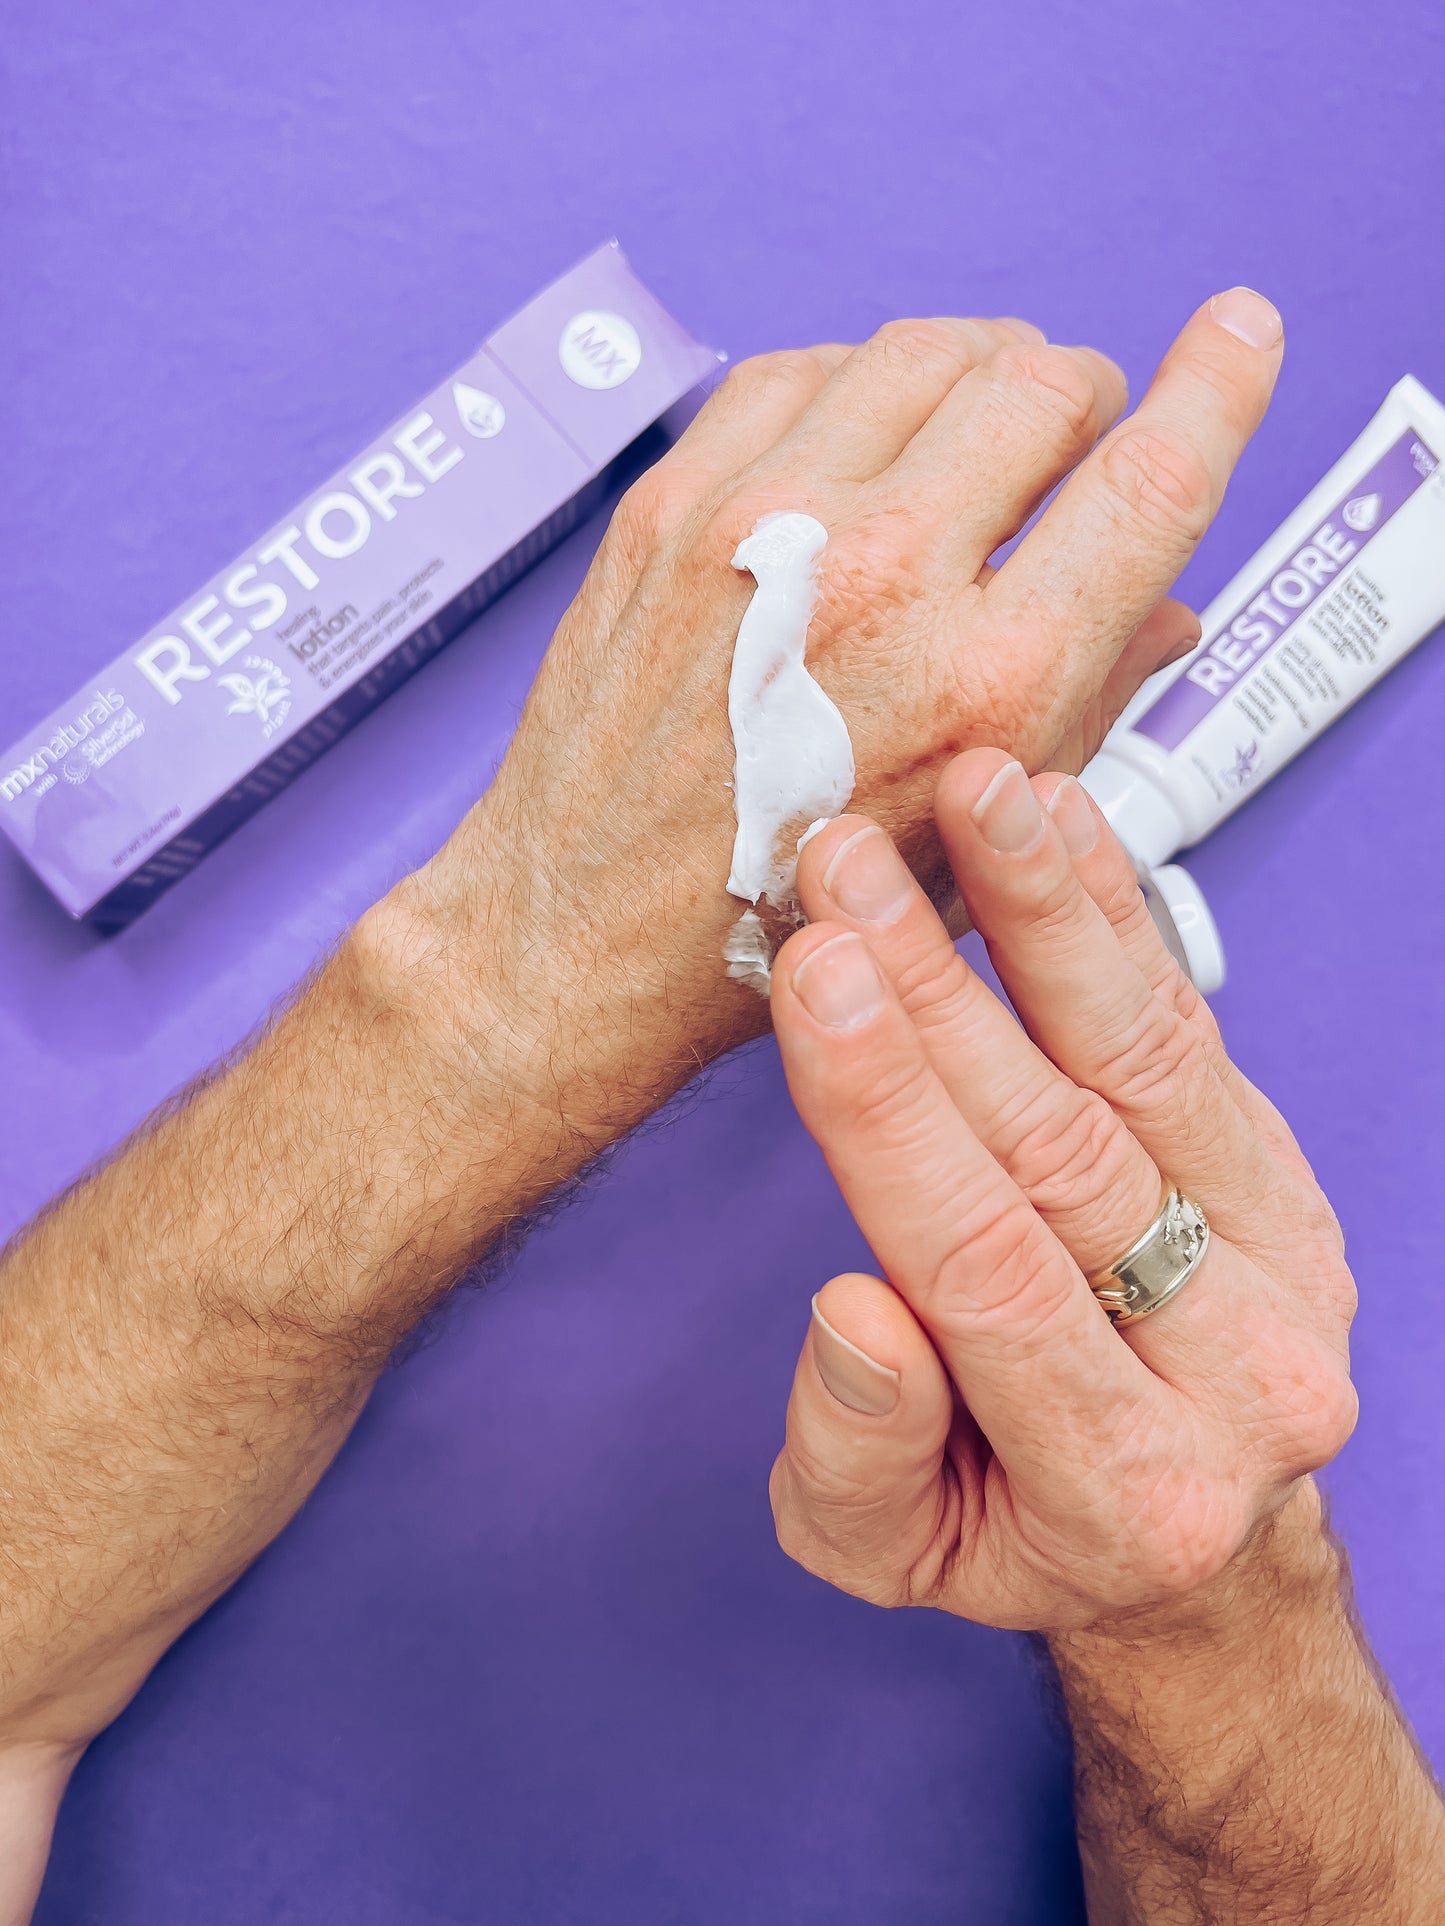 caucasian male hands applying a purple and white, "restore targeted pain relief healing and moisturizing lotion" onto a sore, arthritic hands to relieve the arthritis pain.